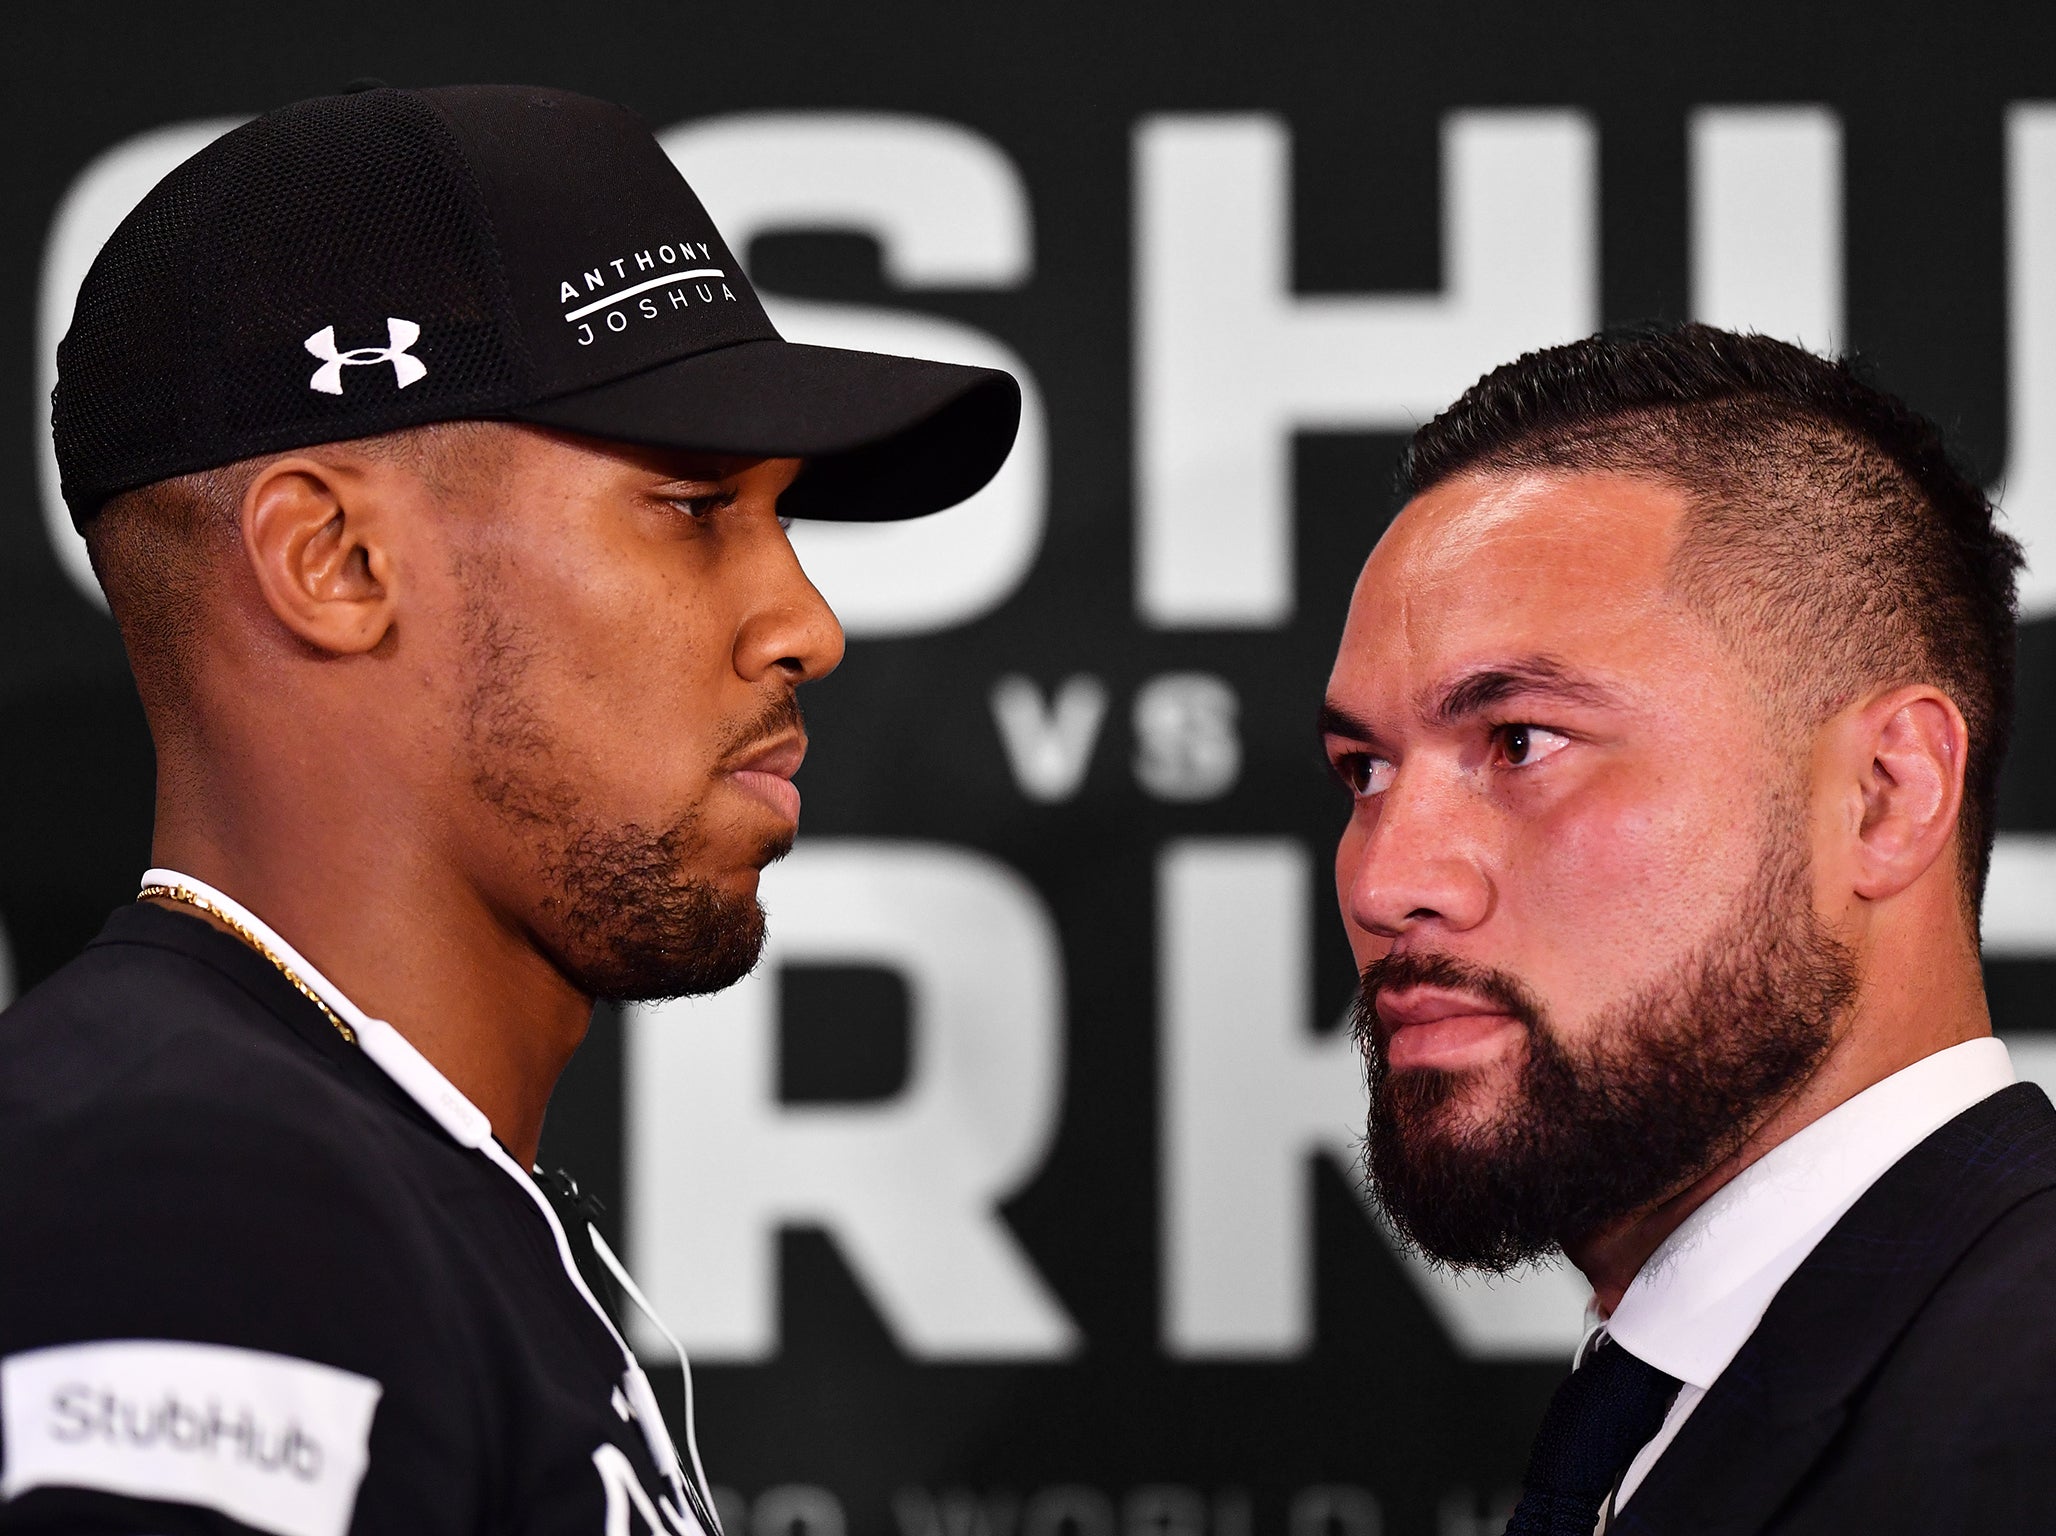 Anthony Joshua and Joseph Parker meet in a unification bout